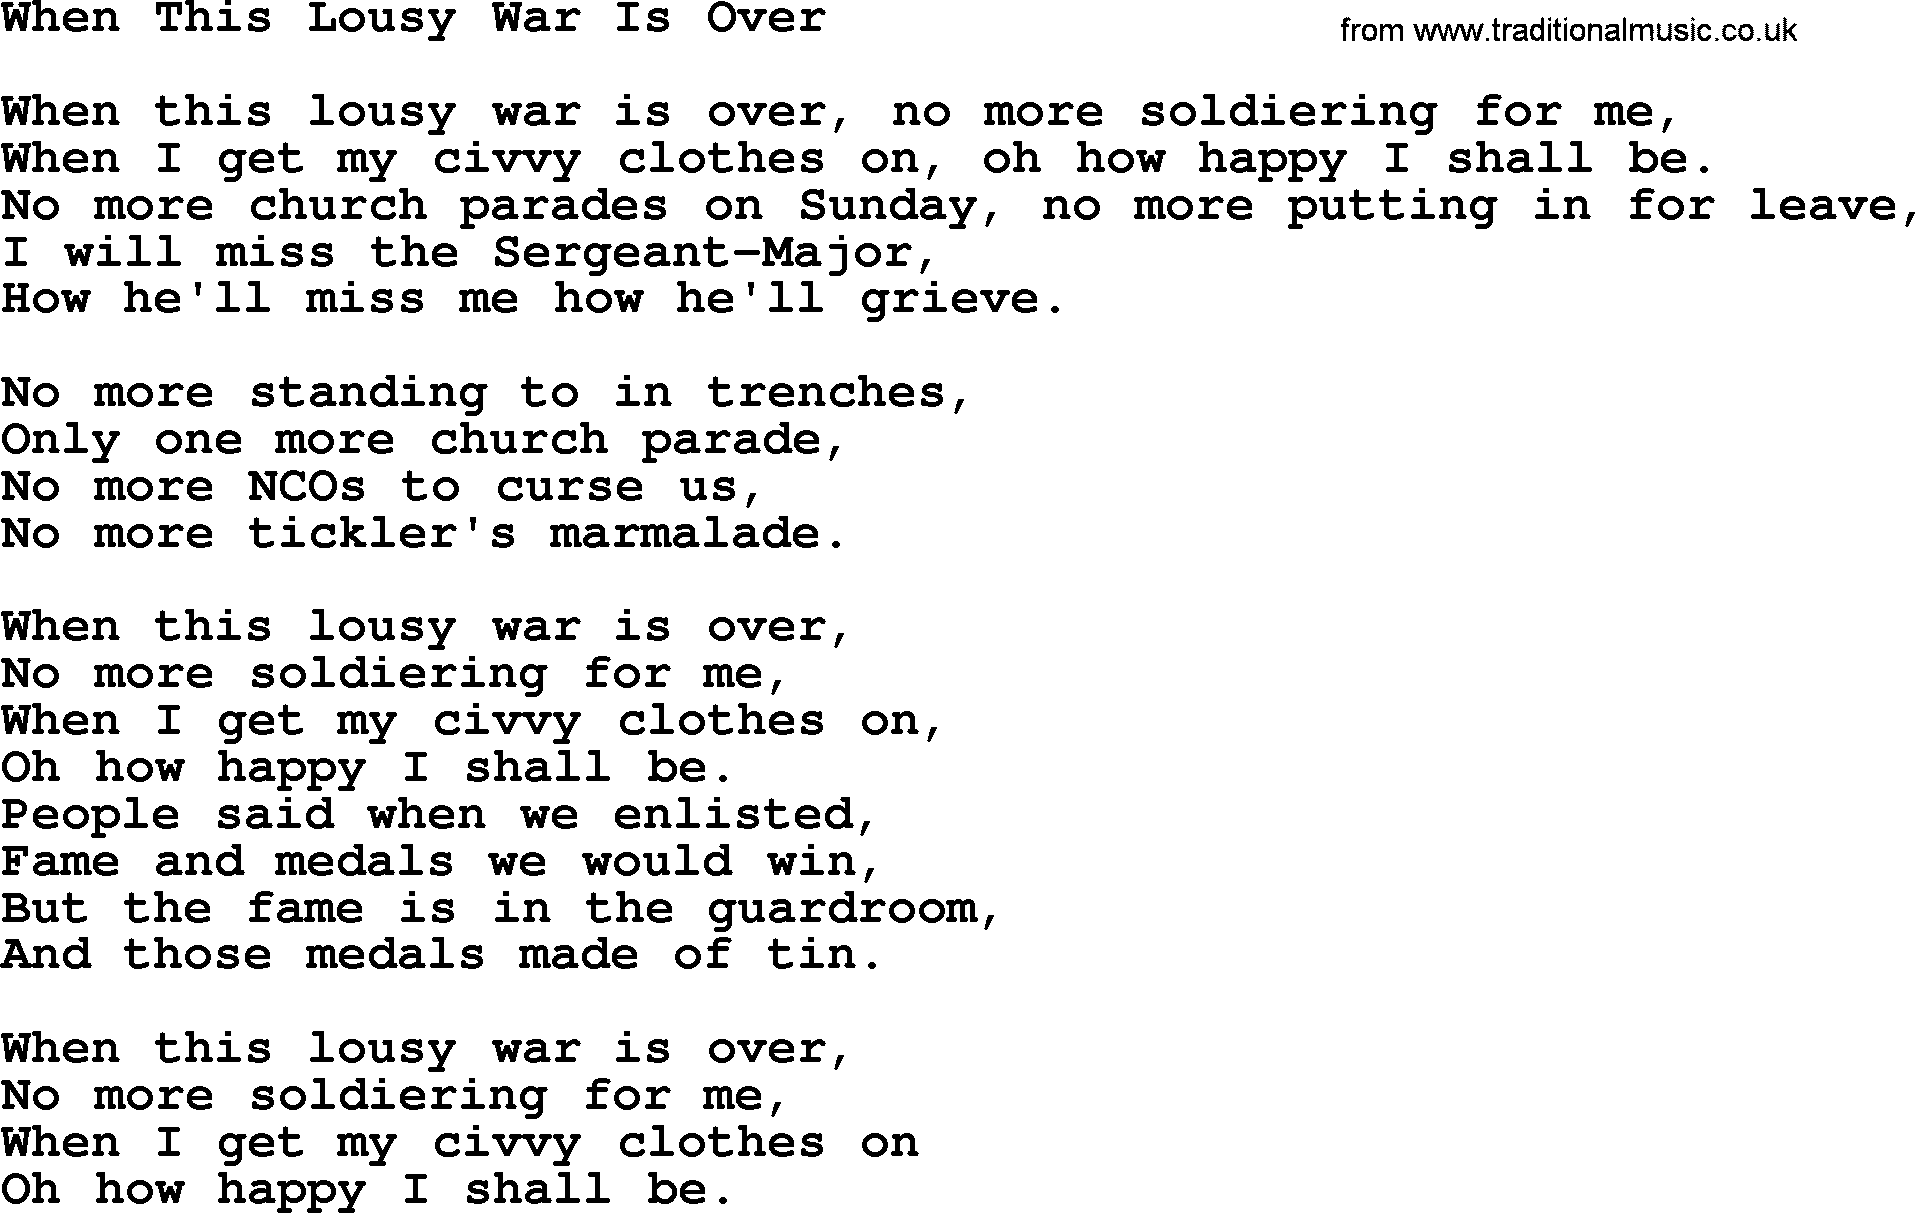 World War(WW1) One Song: When This Lousy War Is Over, lyrics and PDF